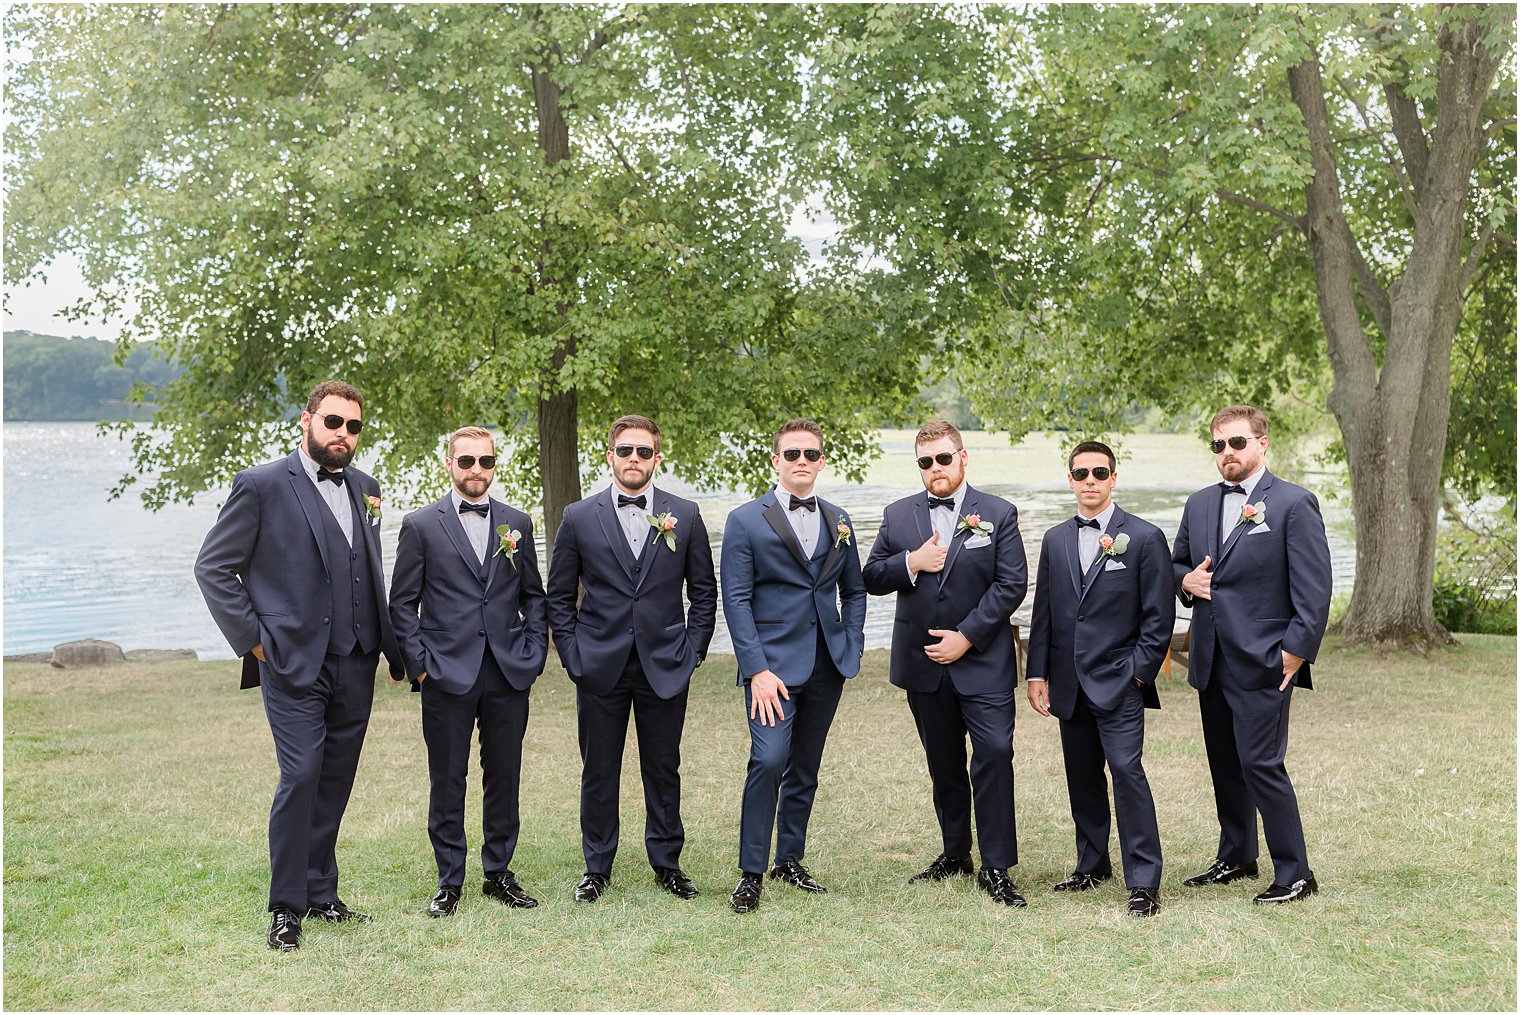 groom stands with groomsmen in navy suits with sunglasses